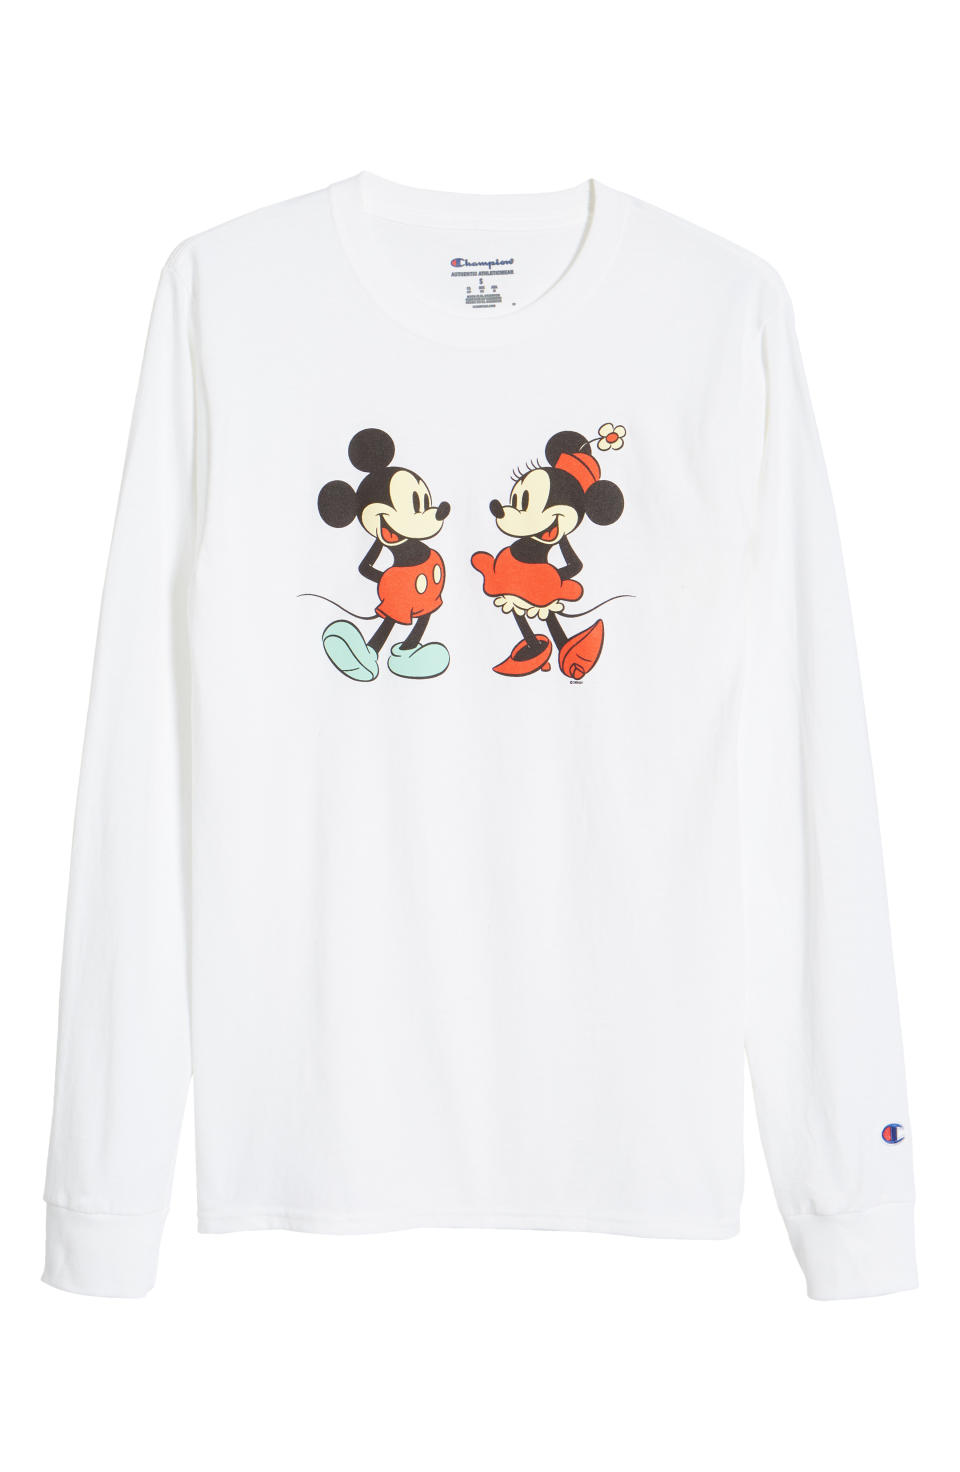 Champion’s Mickey and Minnie long-sleeved T-shirt.